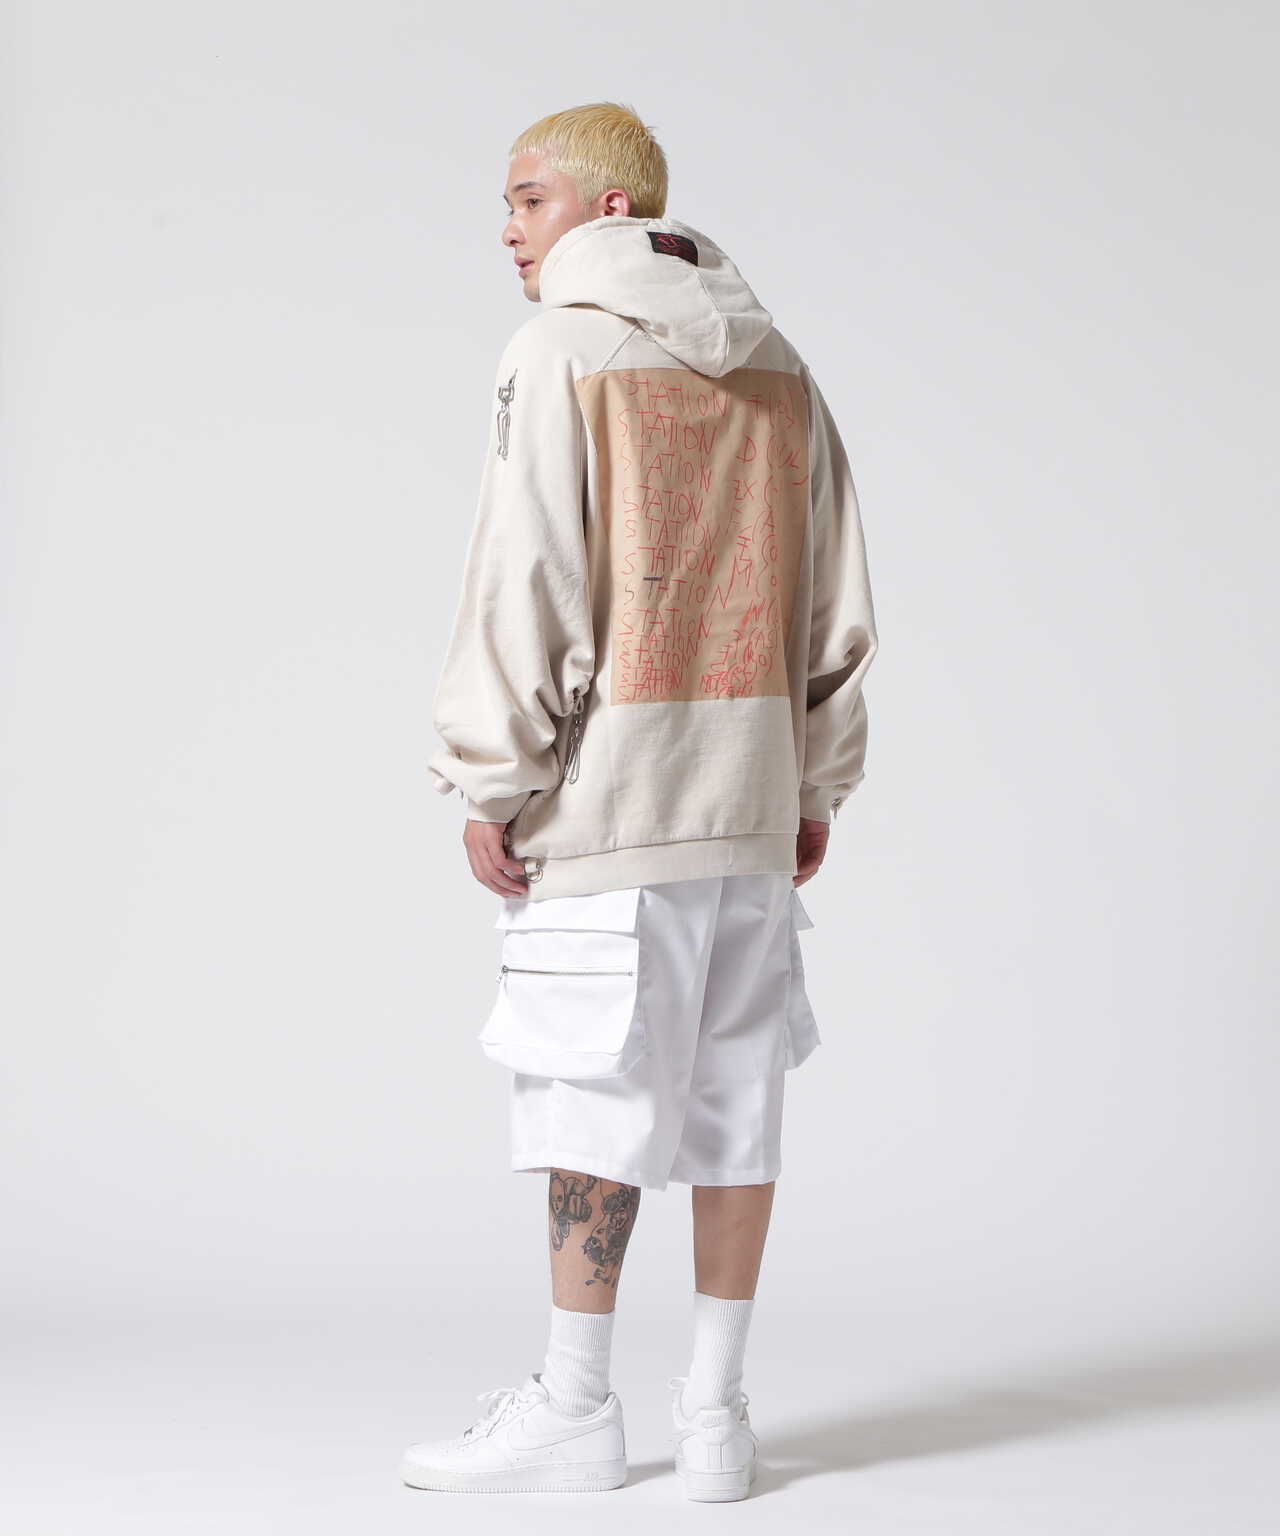 RAF SIMONS/ラフシモンズ/Washed Clasps and patch/パーカー | LHP